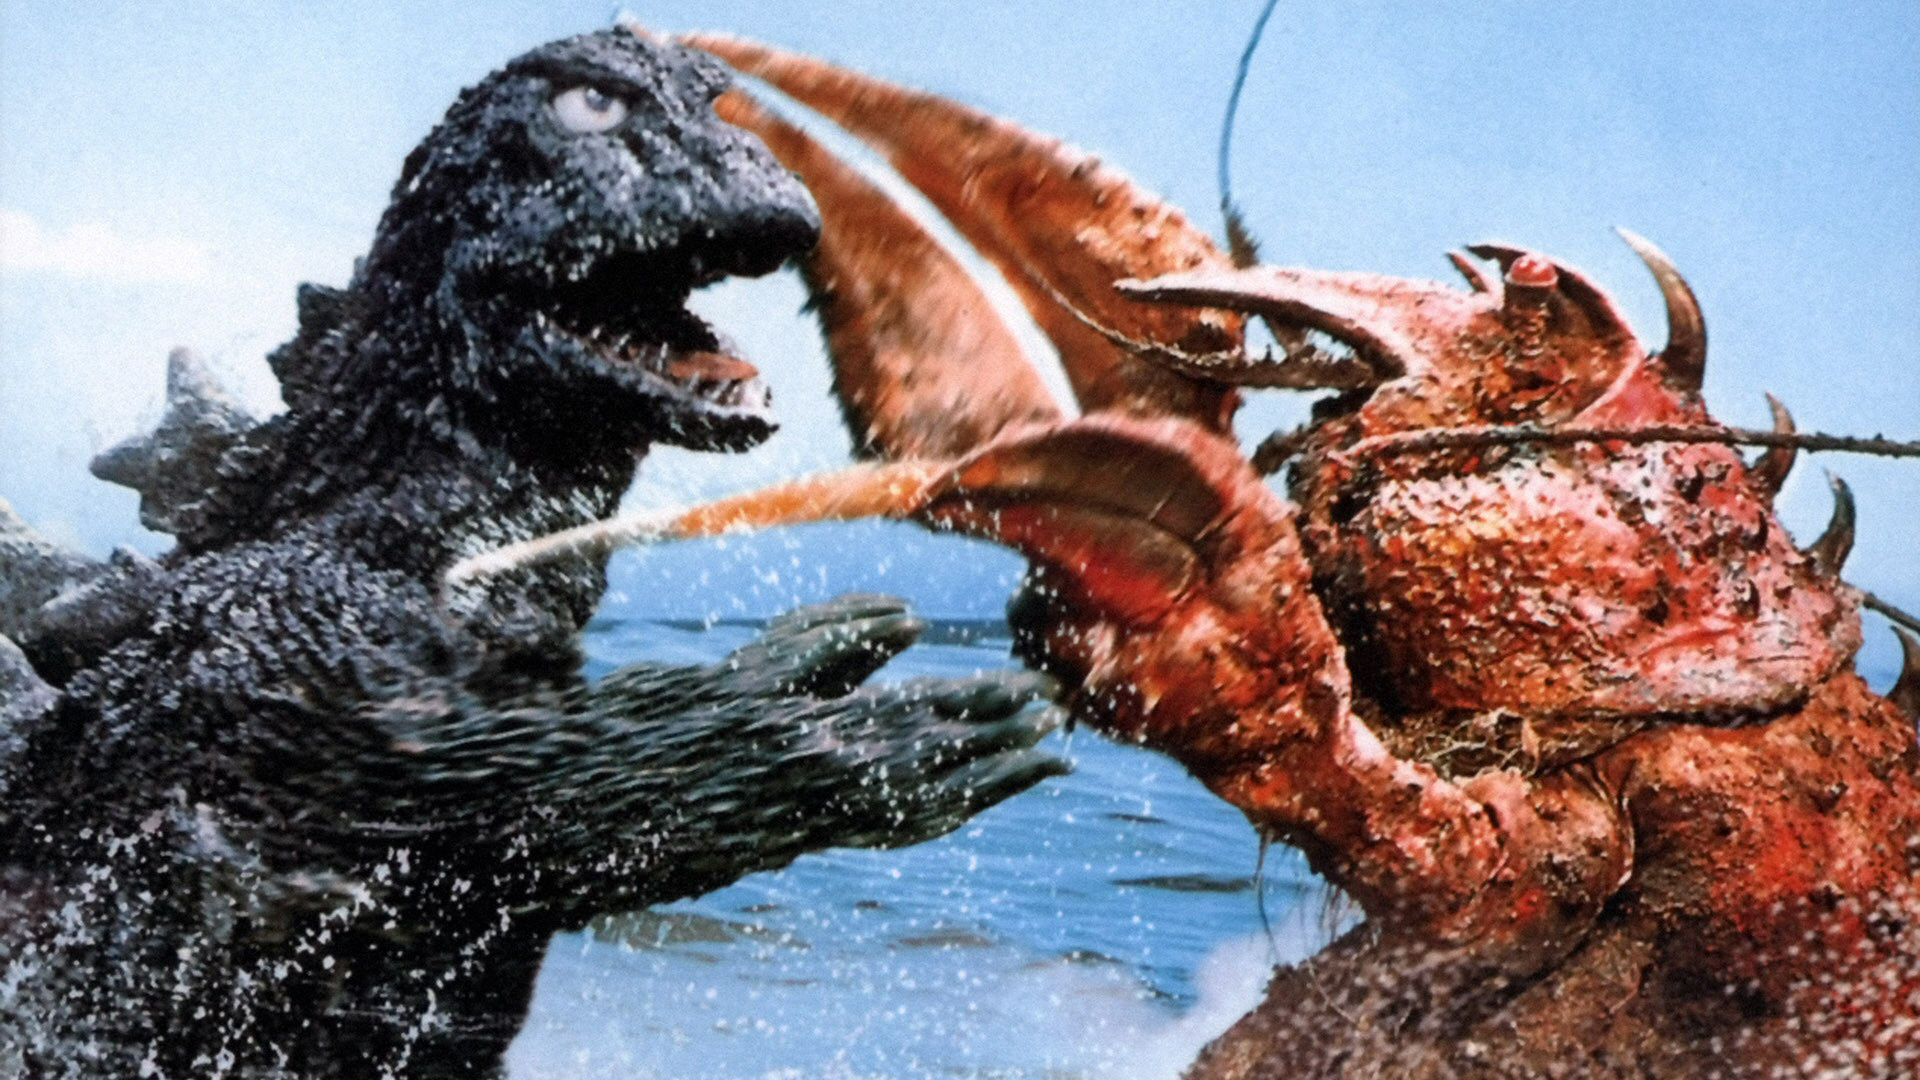 Black Godzilla Fighting With Sea Monster On Ocean With Blue Sky Wallpaper 2K Movies